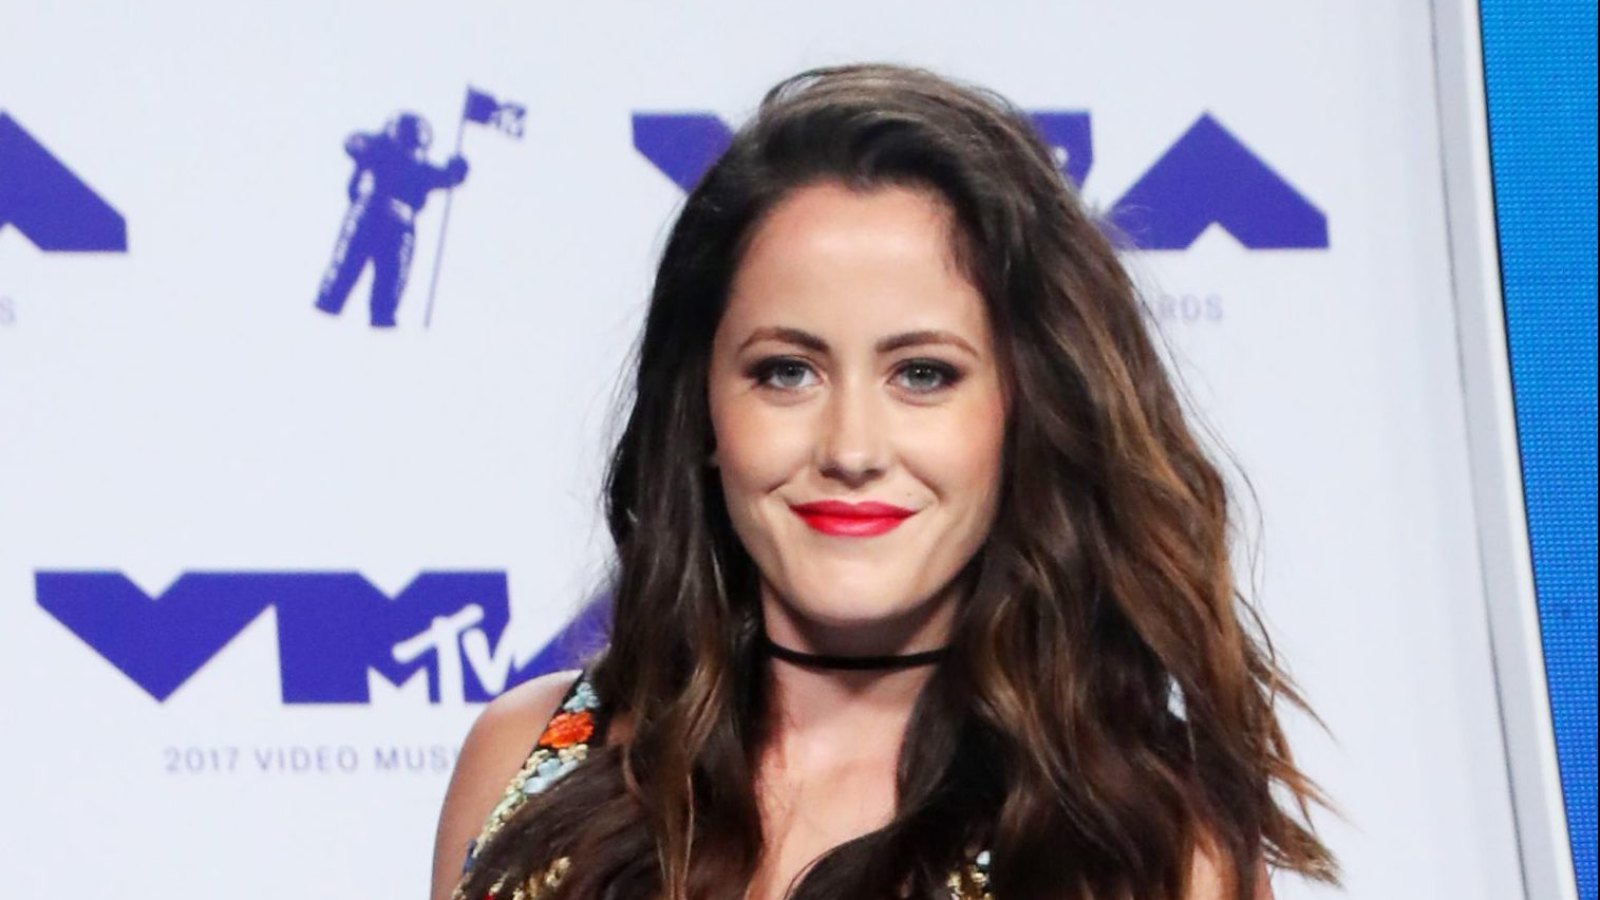 ‘Teen Mom’ Star Jenelle Evans Says She and Son Jace Are 'Closer Than Ever' After Regaining Custody